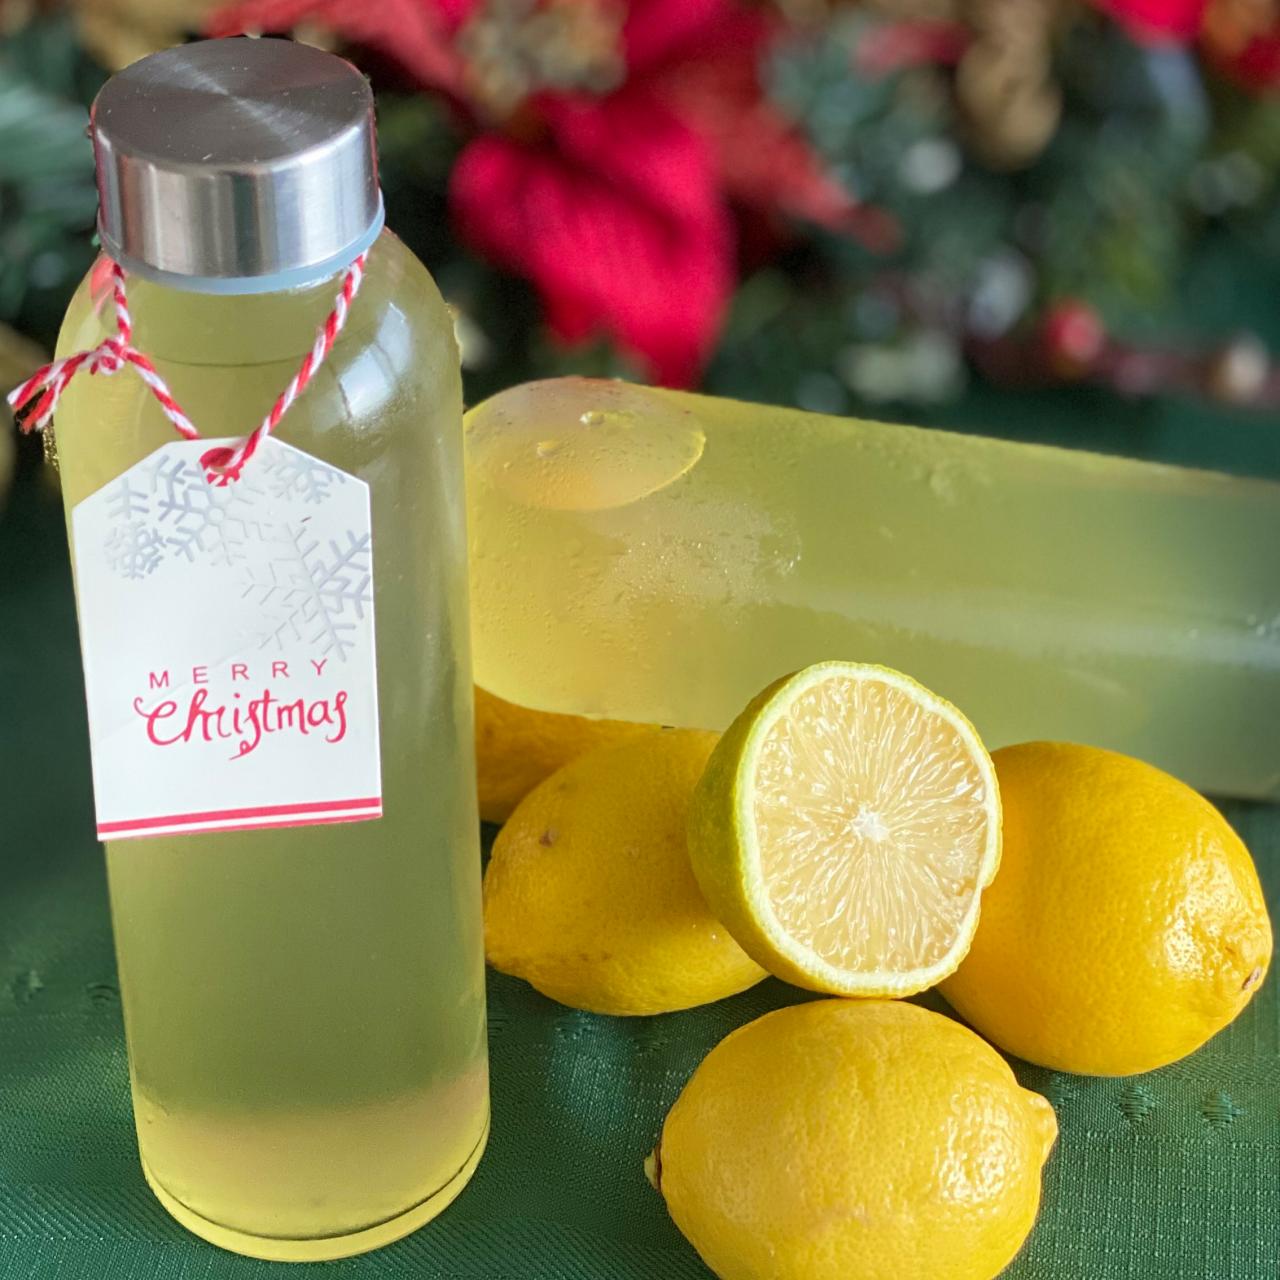 How to Make Homemade Limoncello: A Complete Guide